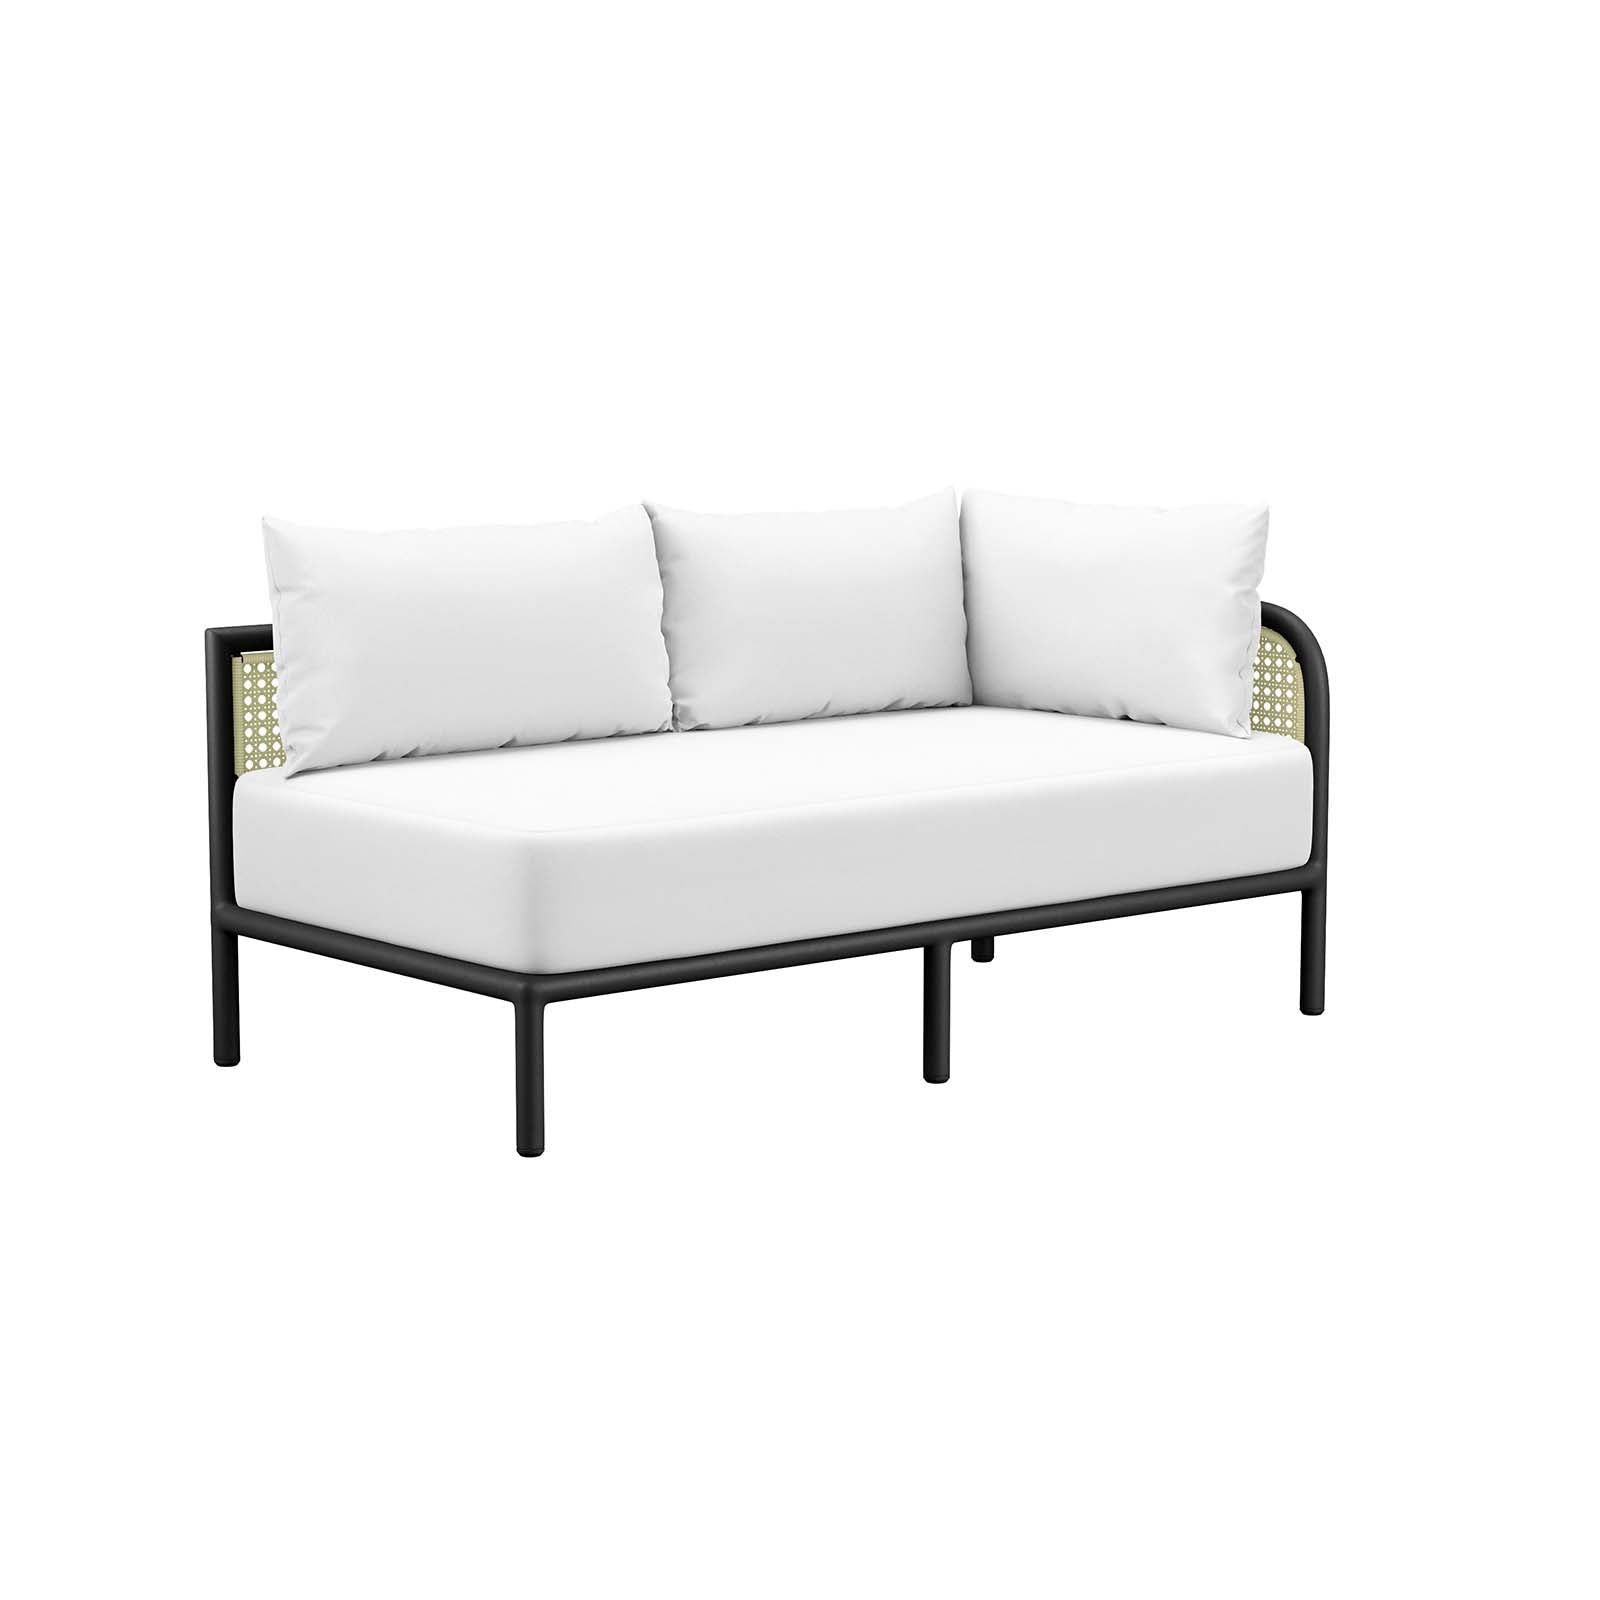 Modway Outdoor Sofas - Hanalei Outdoor Patio 3-Piece Sectional Ivory White